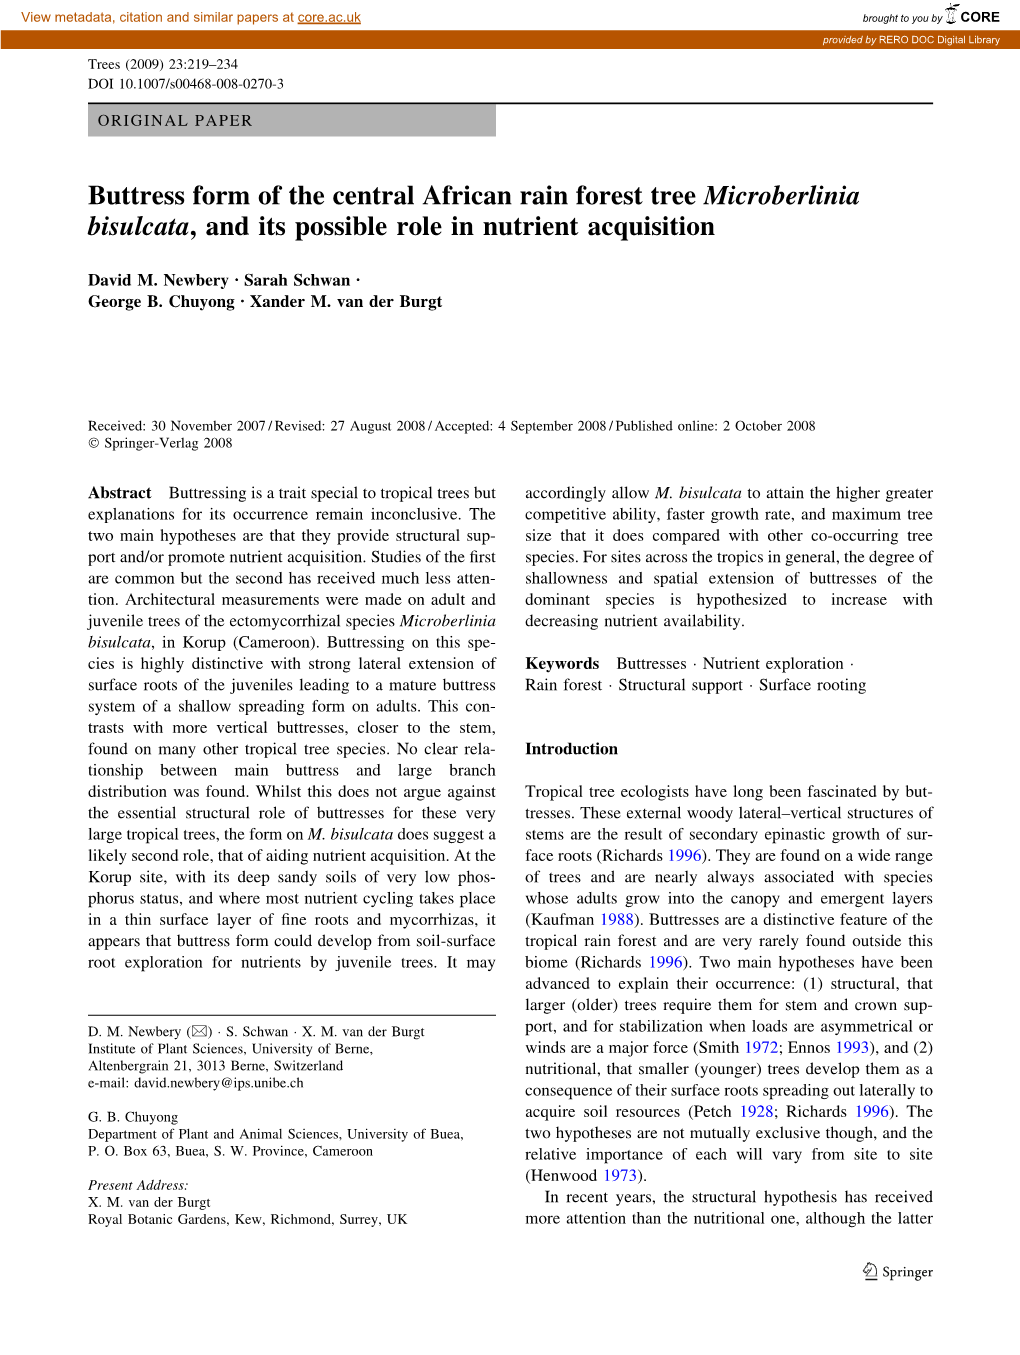 Buttress Form of the Central African Rain Forest Tree Microberlinia Bisulcata, and Its Possible Role in Nutrient Acquisition